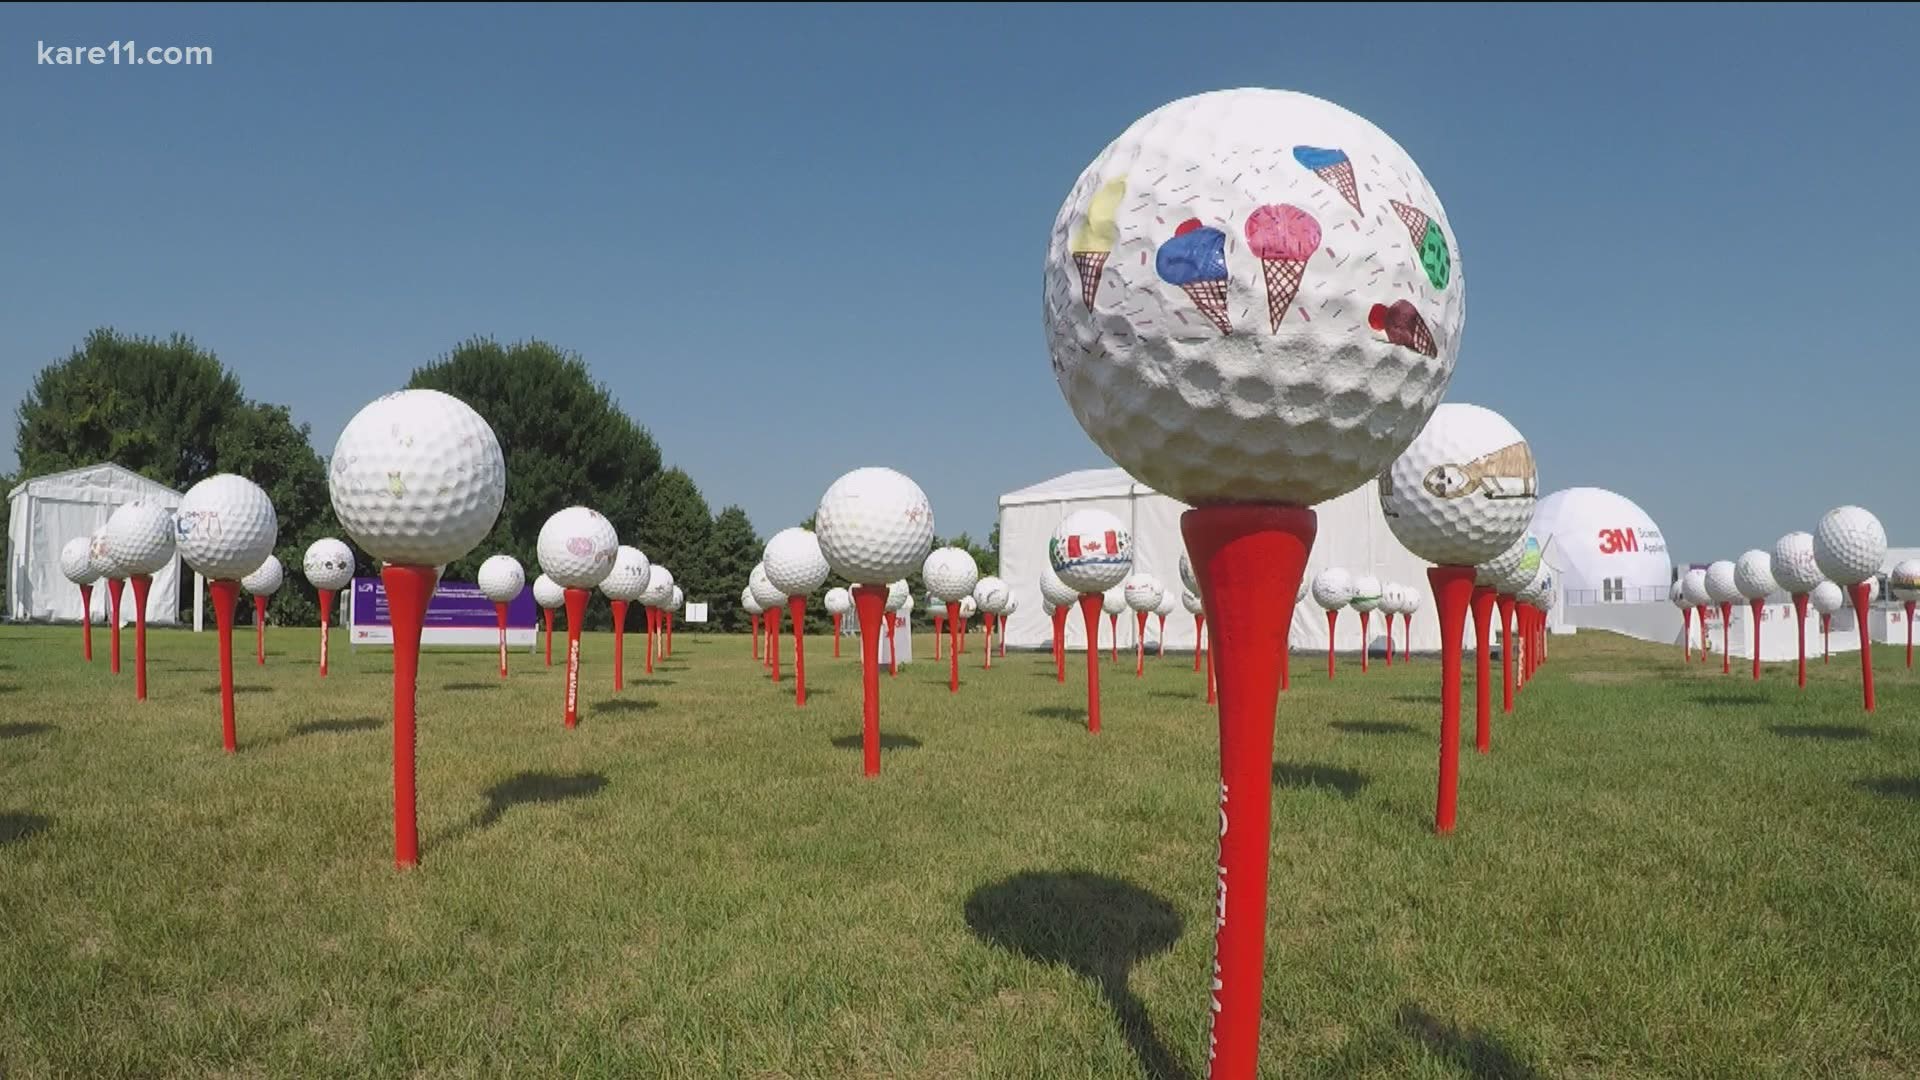 Giant golf balls feature pictures drawn by patients like Tripp Smith from the University of Minnesota Masonic Children's Hospital.